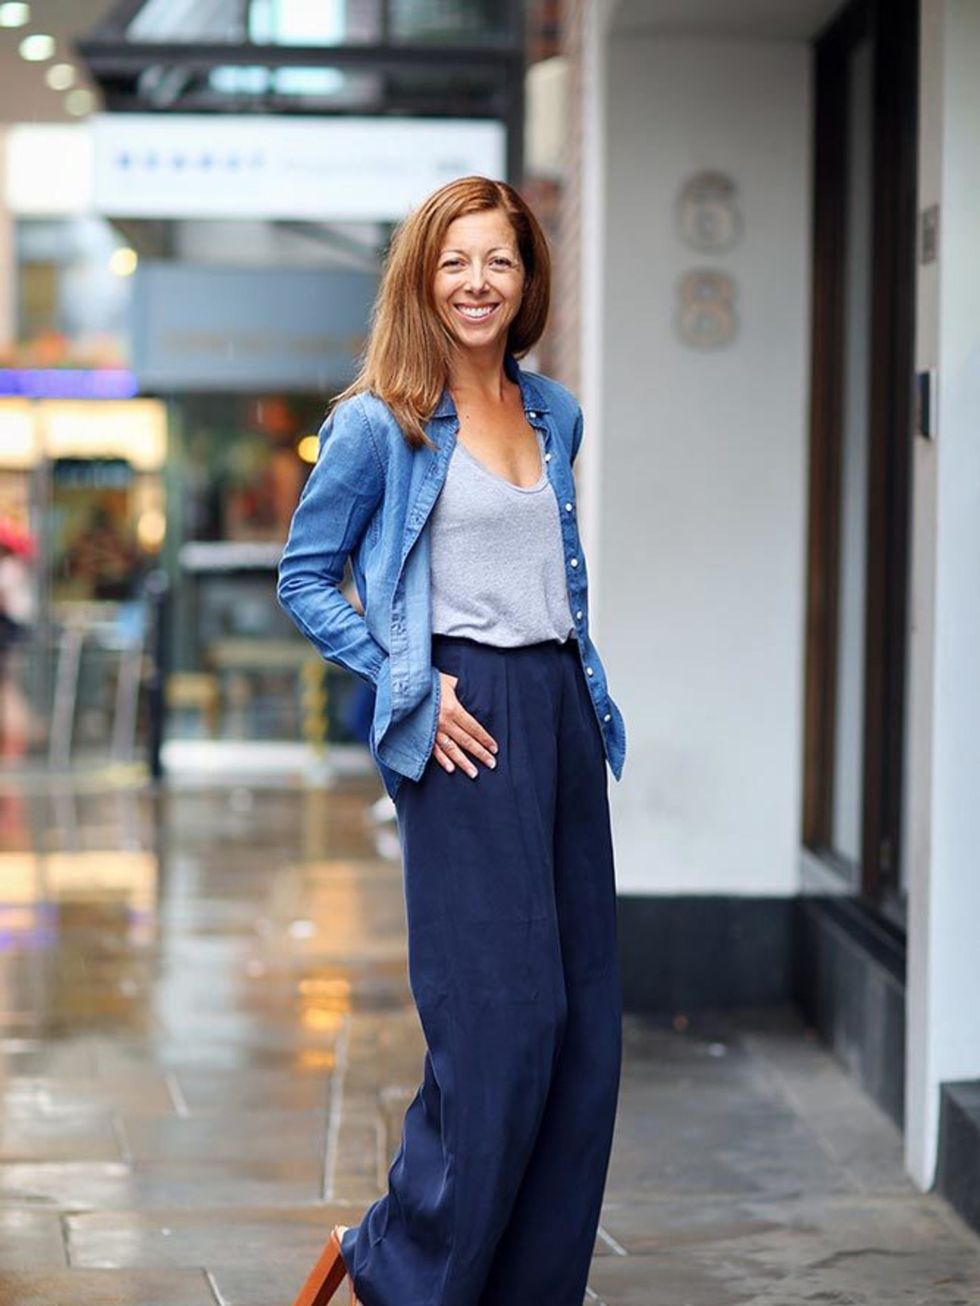 <p>Kirsty Dale, Executive Fashion and Beauty Director</p>

<p>Conscious denim shirt, Conscious trousers</p>